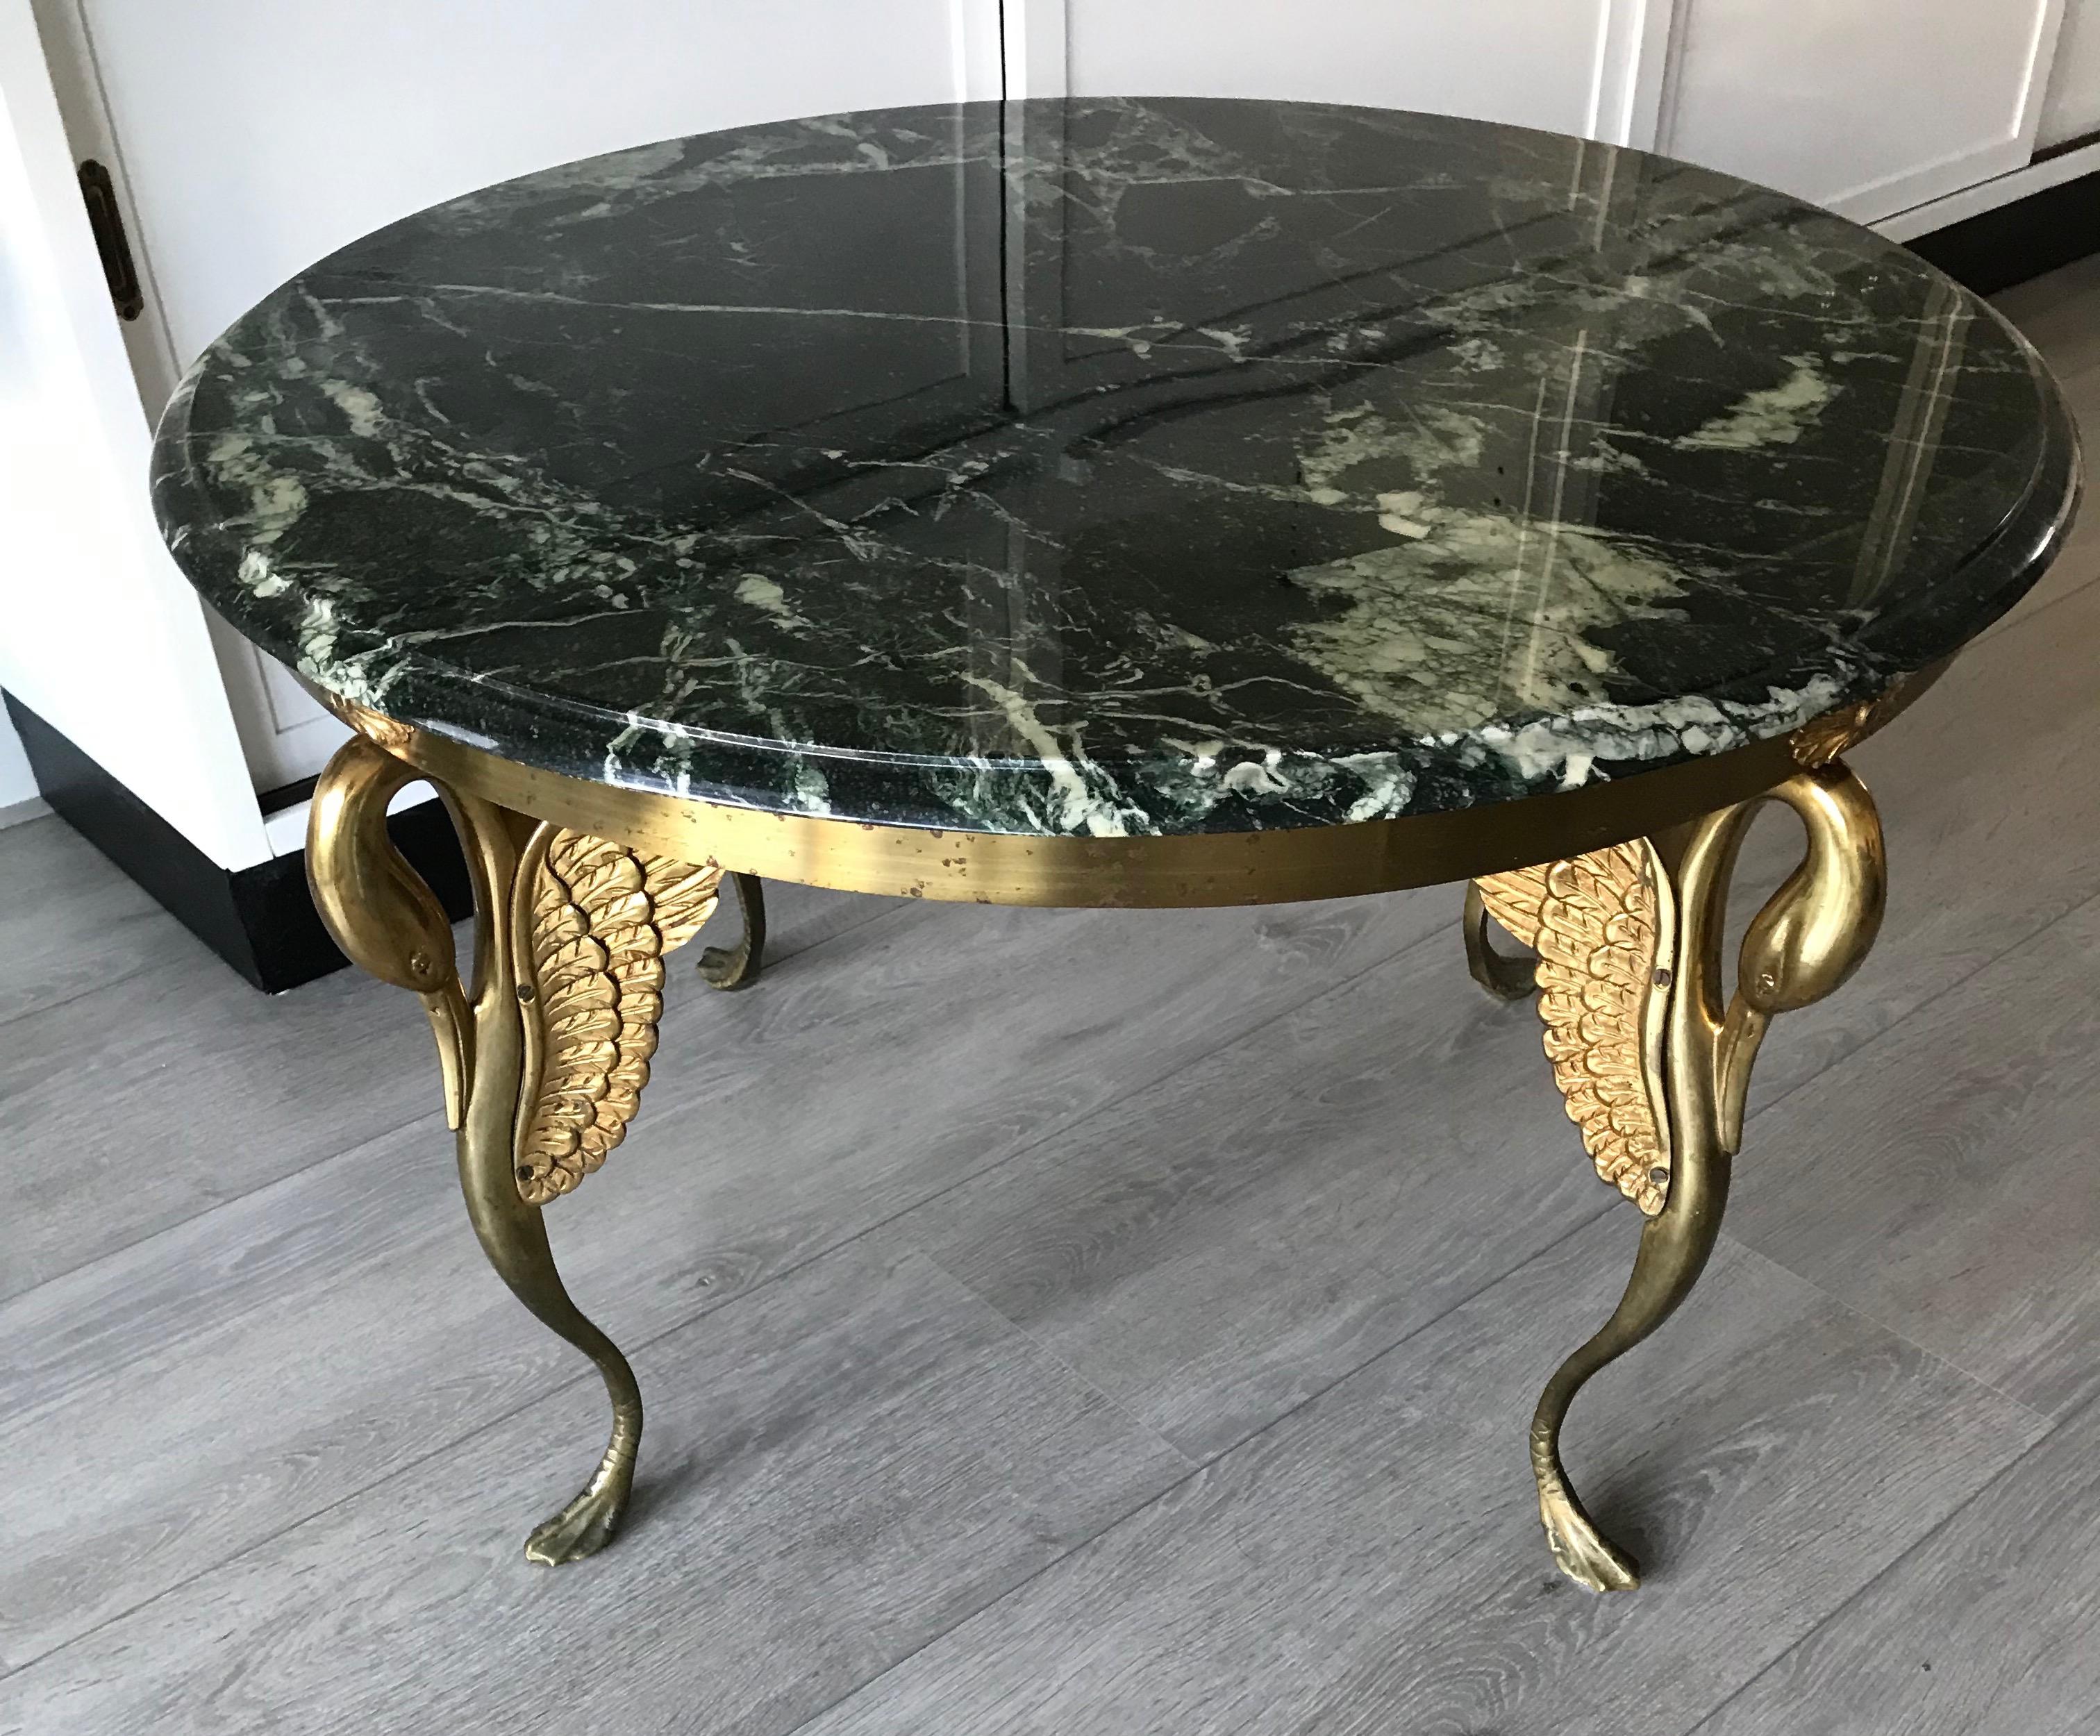 Good size, practical and very decorative round coffee table.

This beautiful quality coffee or end table is highly decorative and it comes with impressive details. The best ofcourse are the four elegant and stylized, bronze swan legs. Their grace